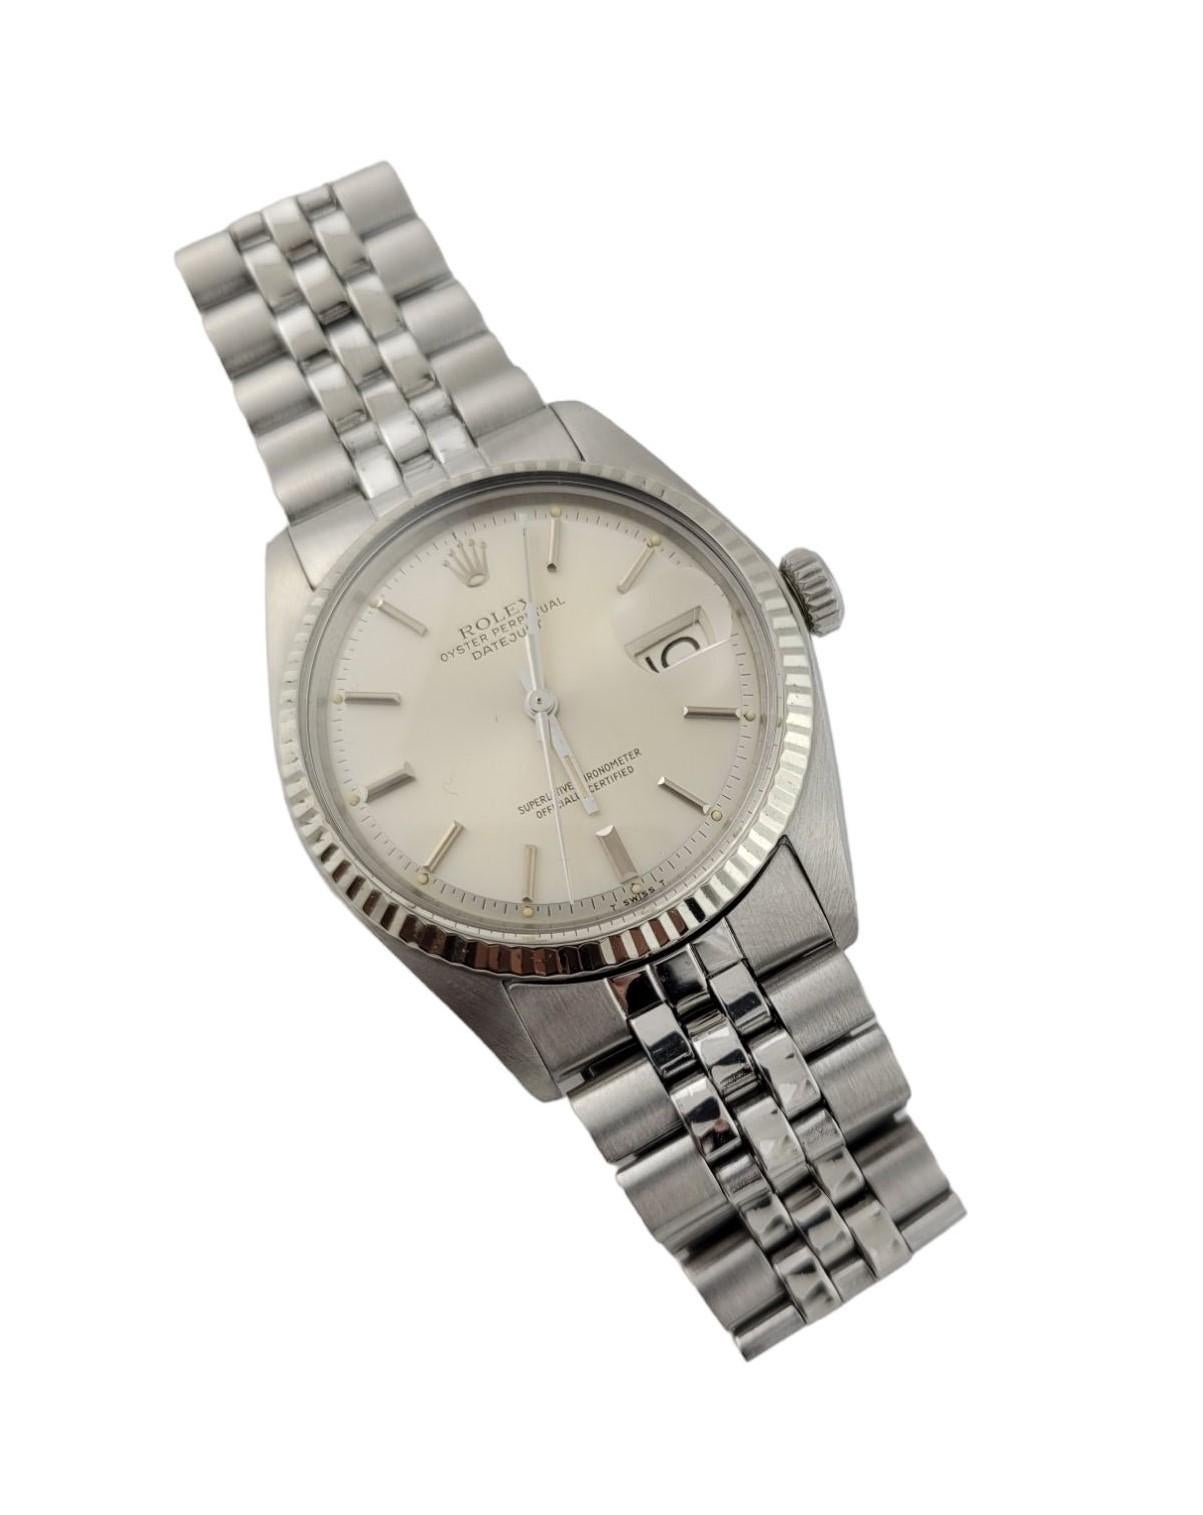 1958 Rolex Datejust 1601 Men's Watch Stainless Silver Dial 1601 1